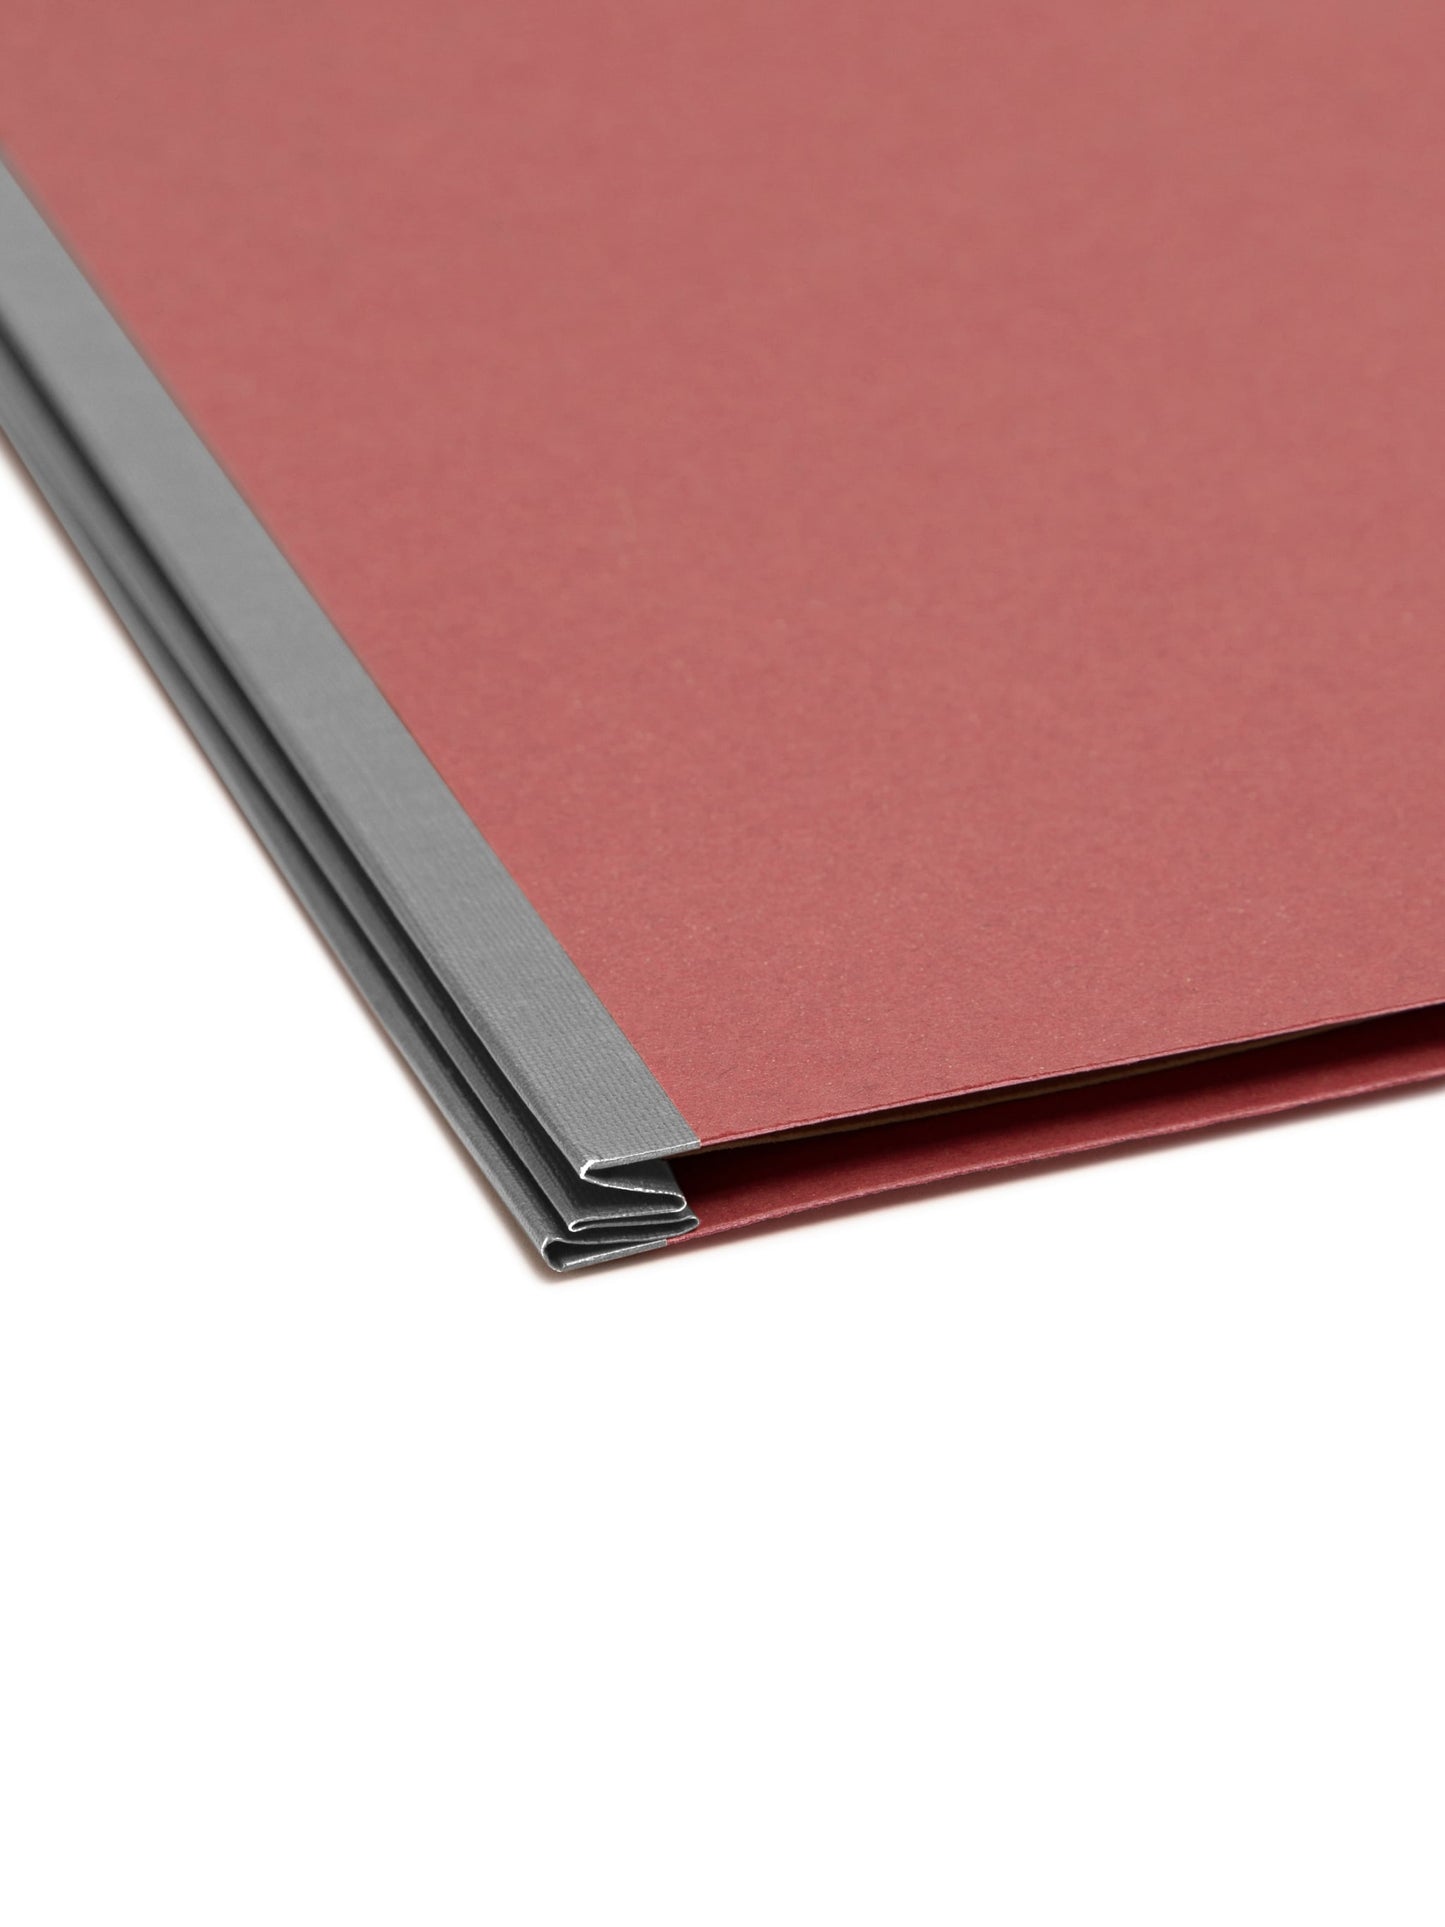 100% Recycled Value Pressboard Colored Classification Folders, 2/5 Cut Tab, 2 inch Expansion, 1 Divider, Red Color, Letter Size, Set of 0, 30086486211827